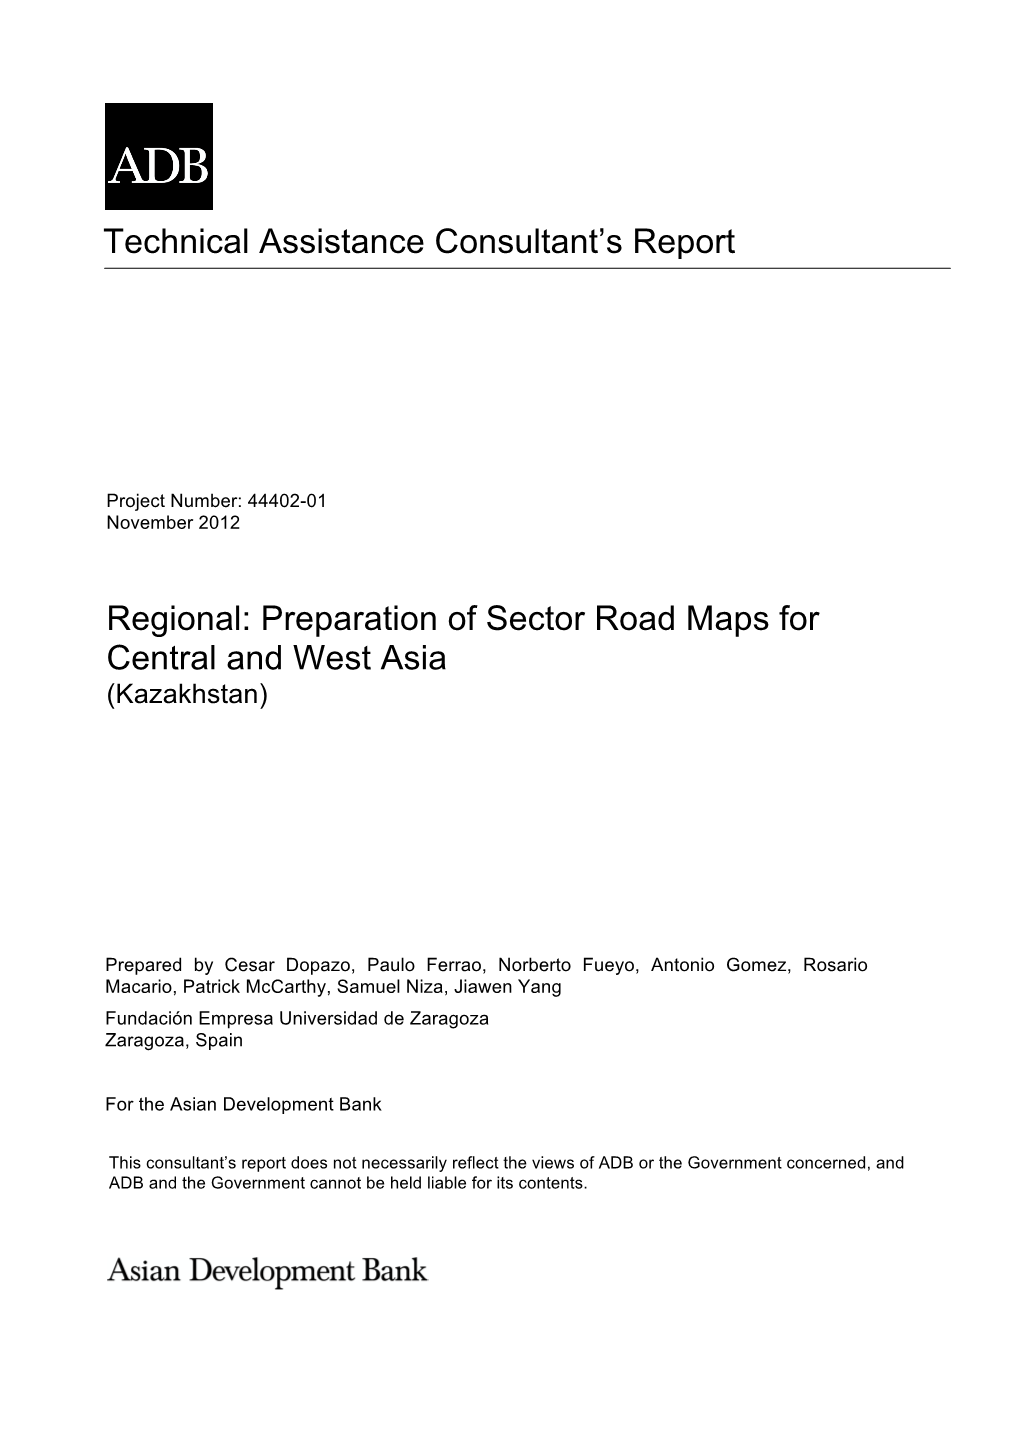 Regional: Preparation of Sector Road Maps for Central and West Asia (Kazakhstan)